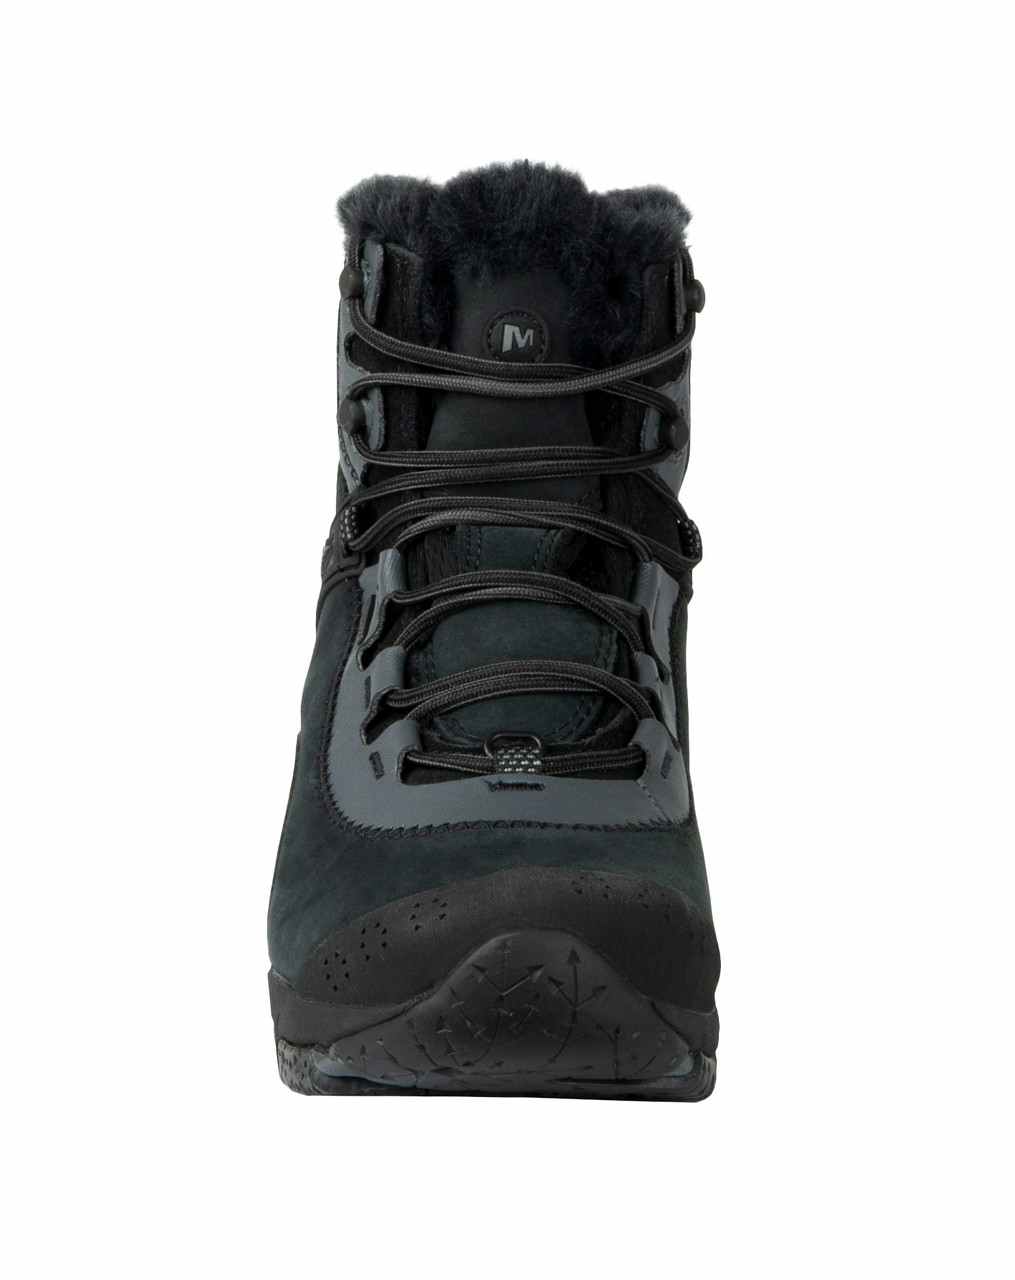 Bottes Thermo Arc 8 Waterproof Noir